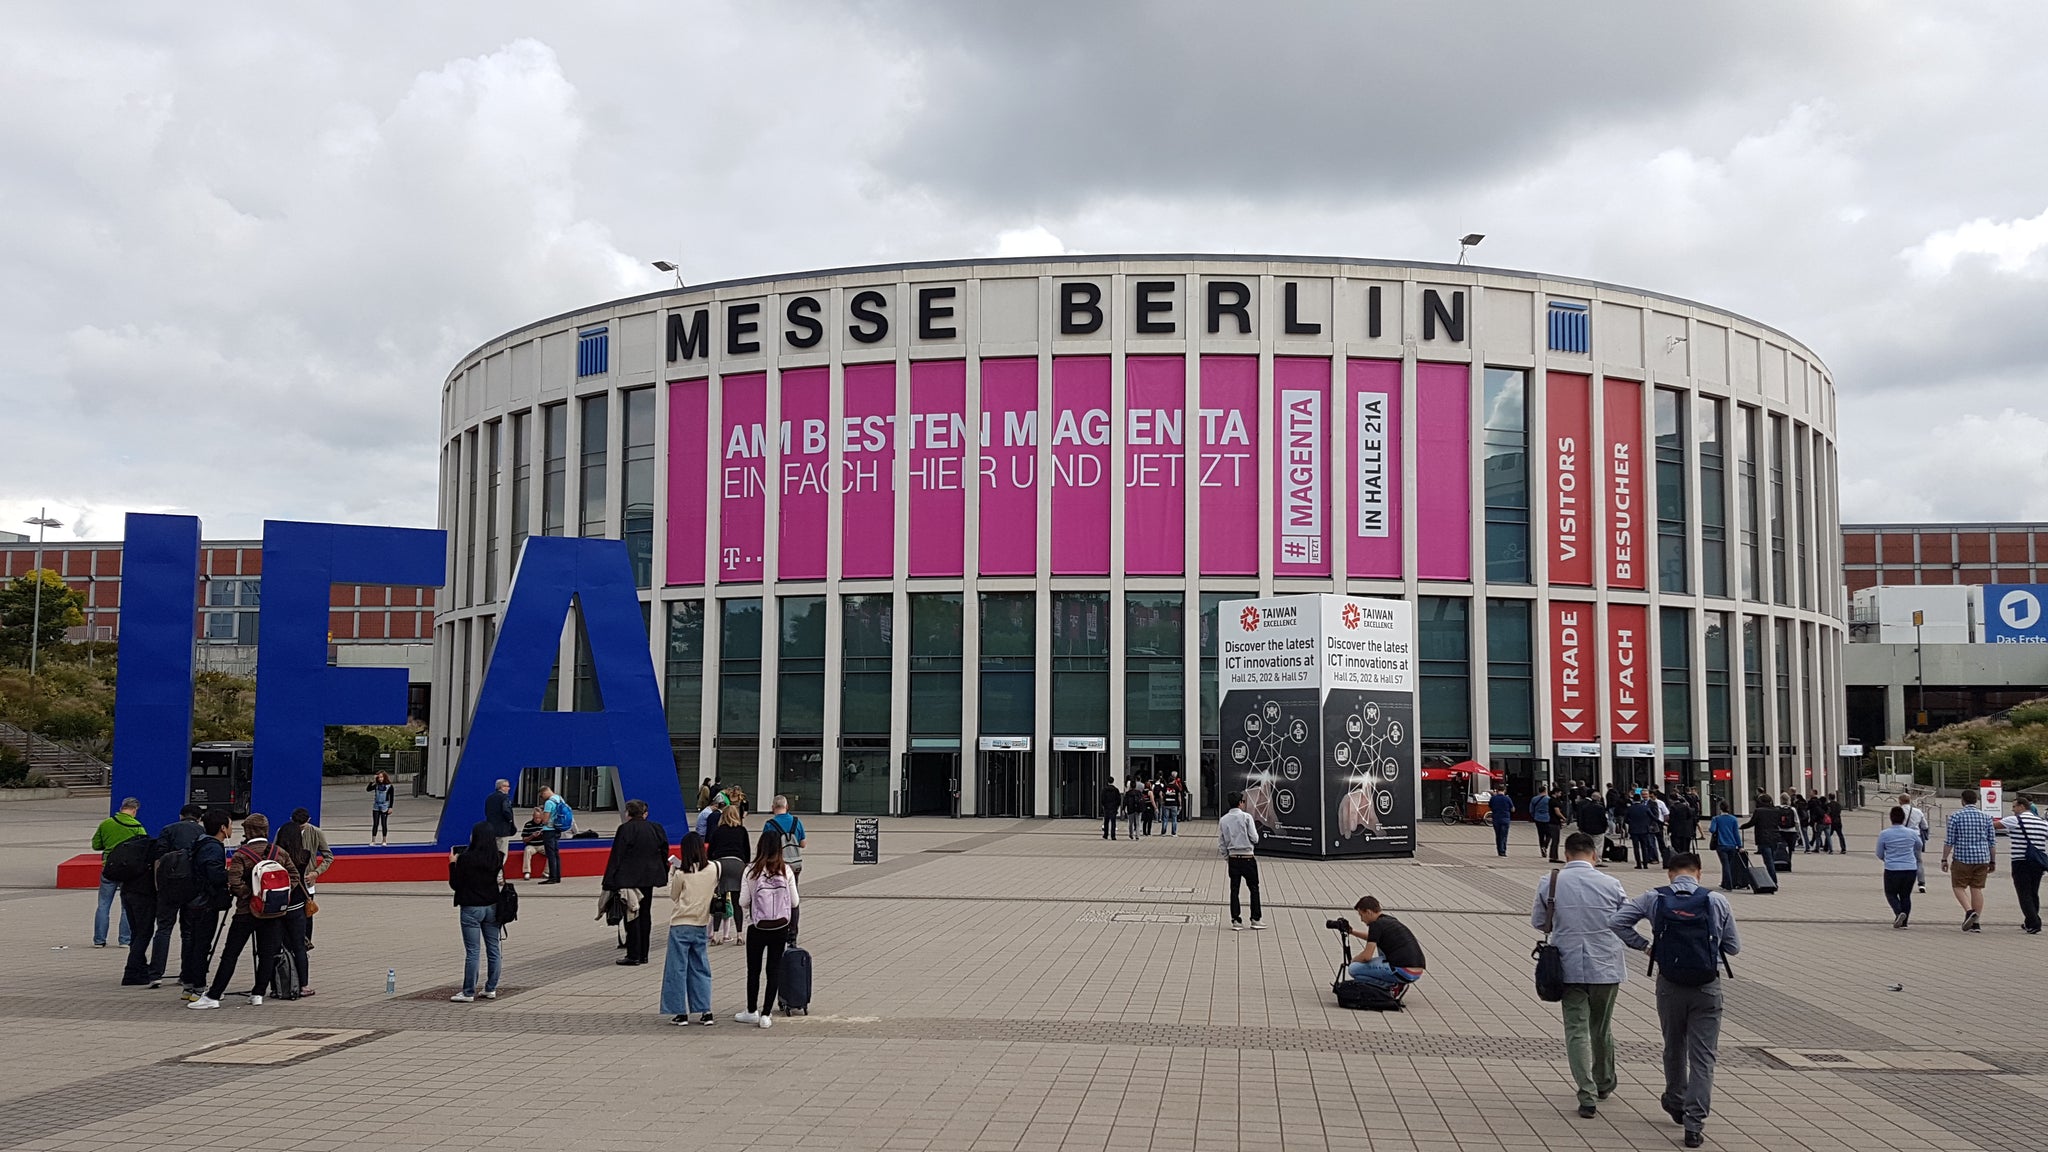 Okka was at IFA Berlin for the first time